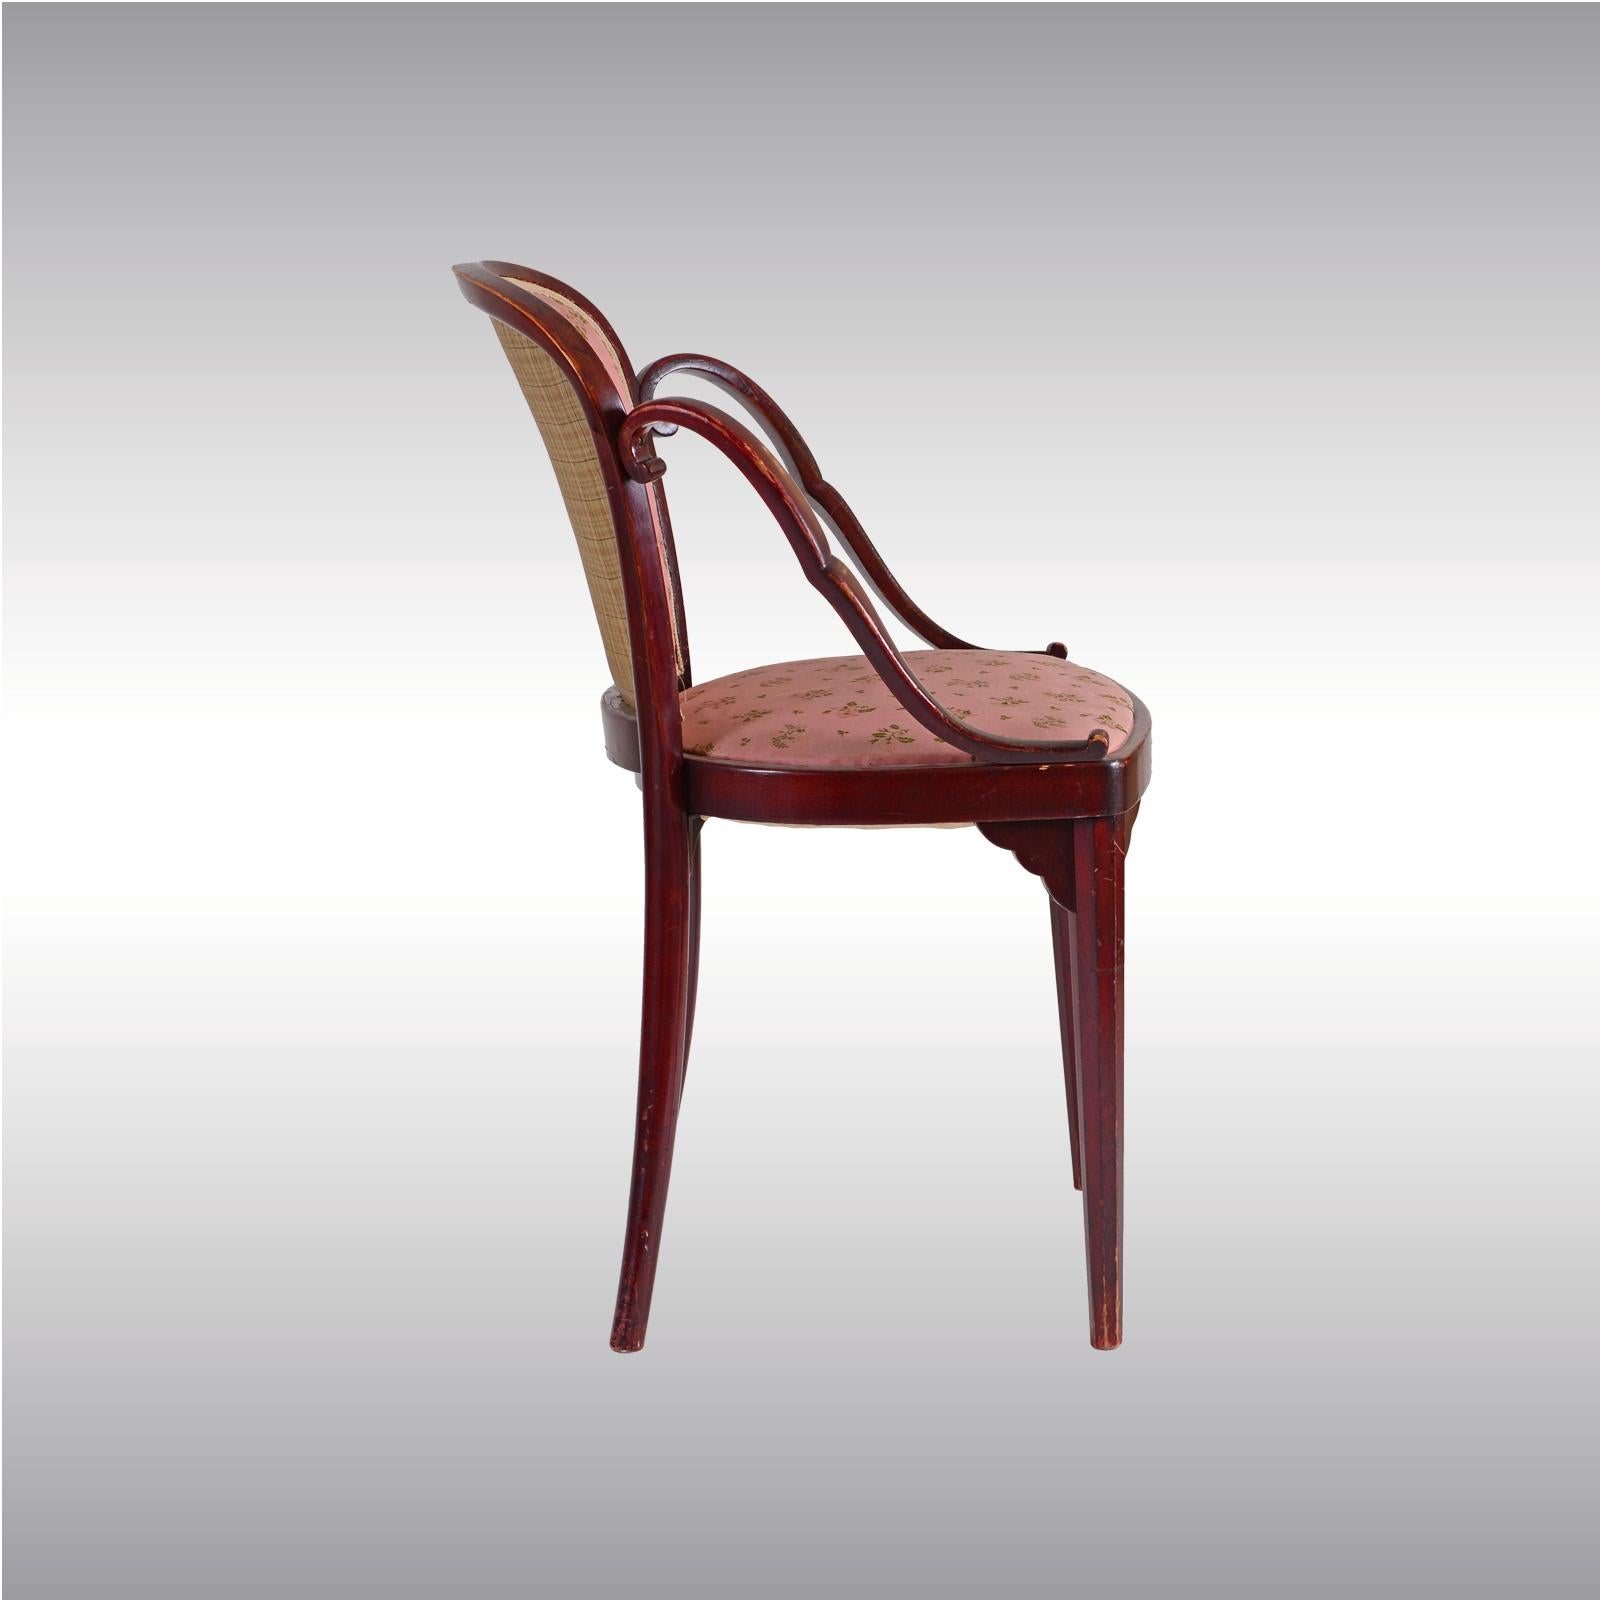 Hand-Crafted Original Josef Hoffmann & Kohn Jacob Chair from 1914 For Sale